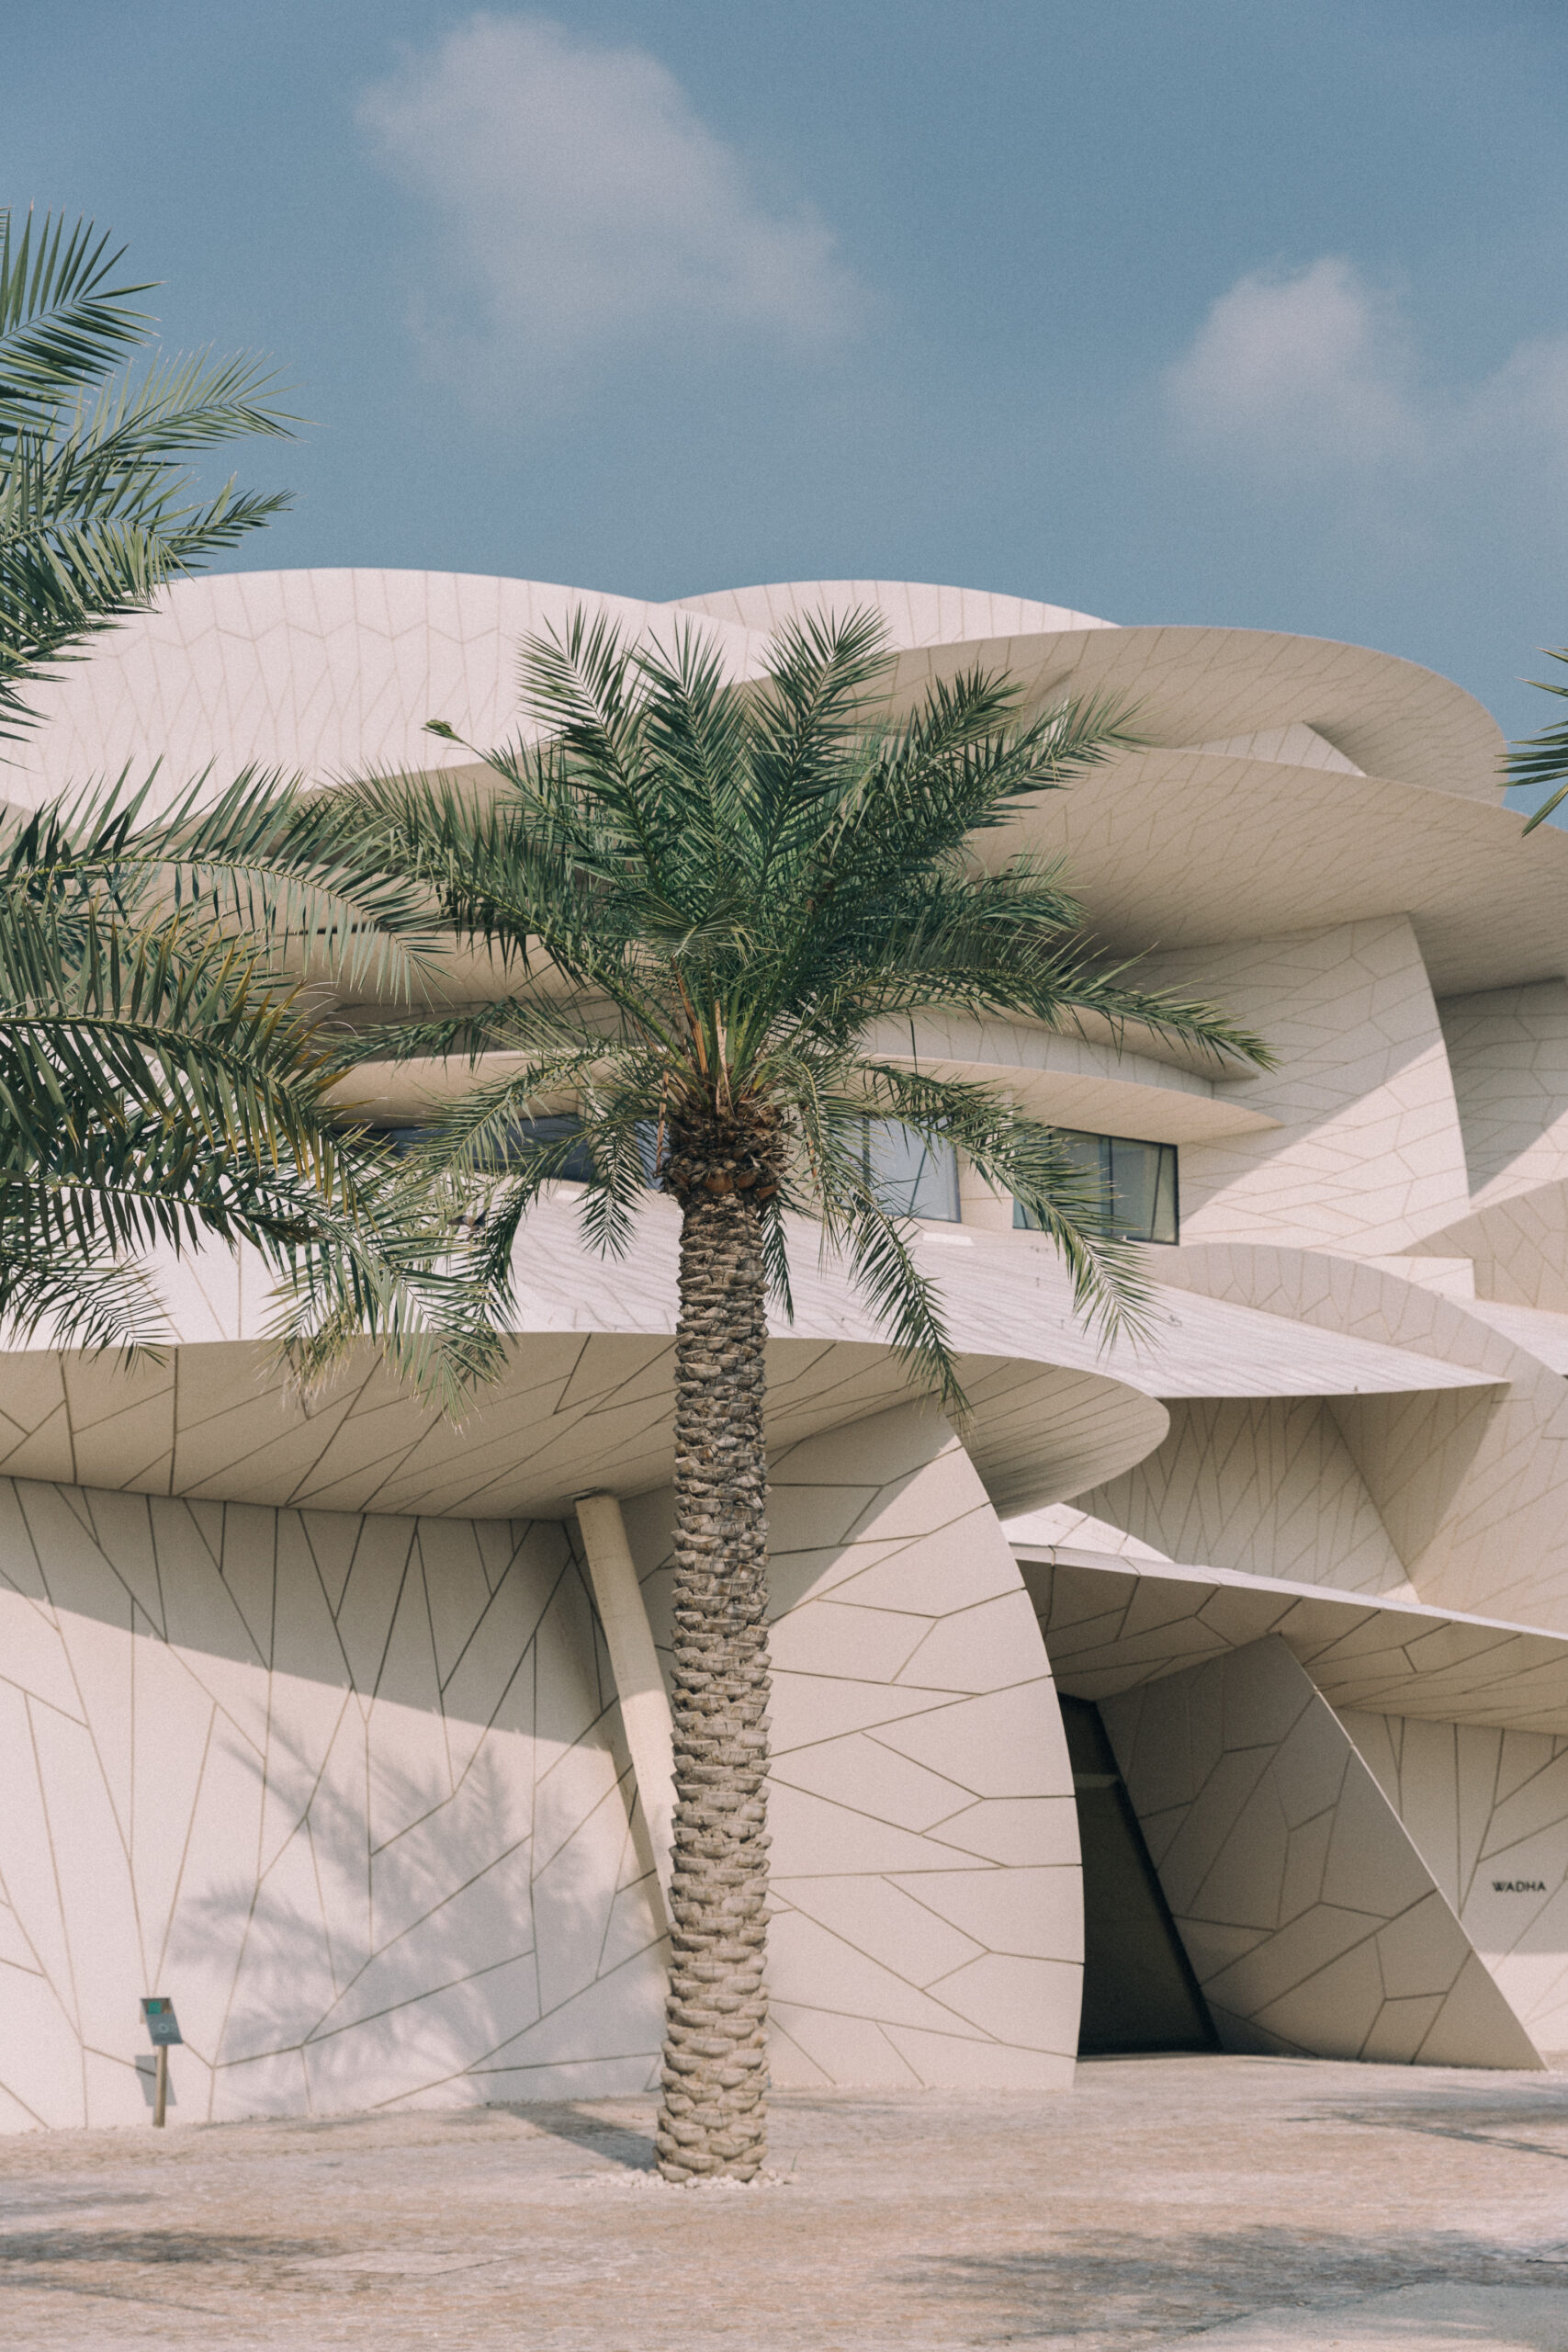 National Museum of Qatar: A photographer’s diary